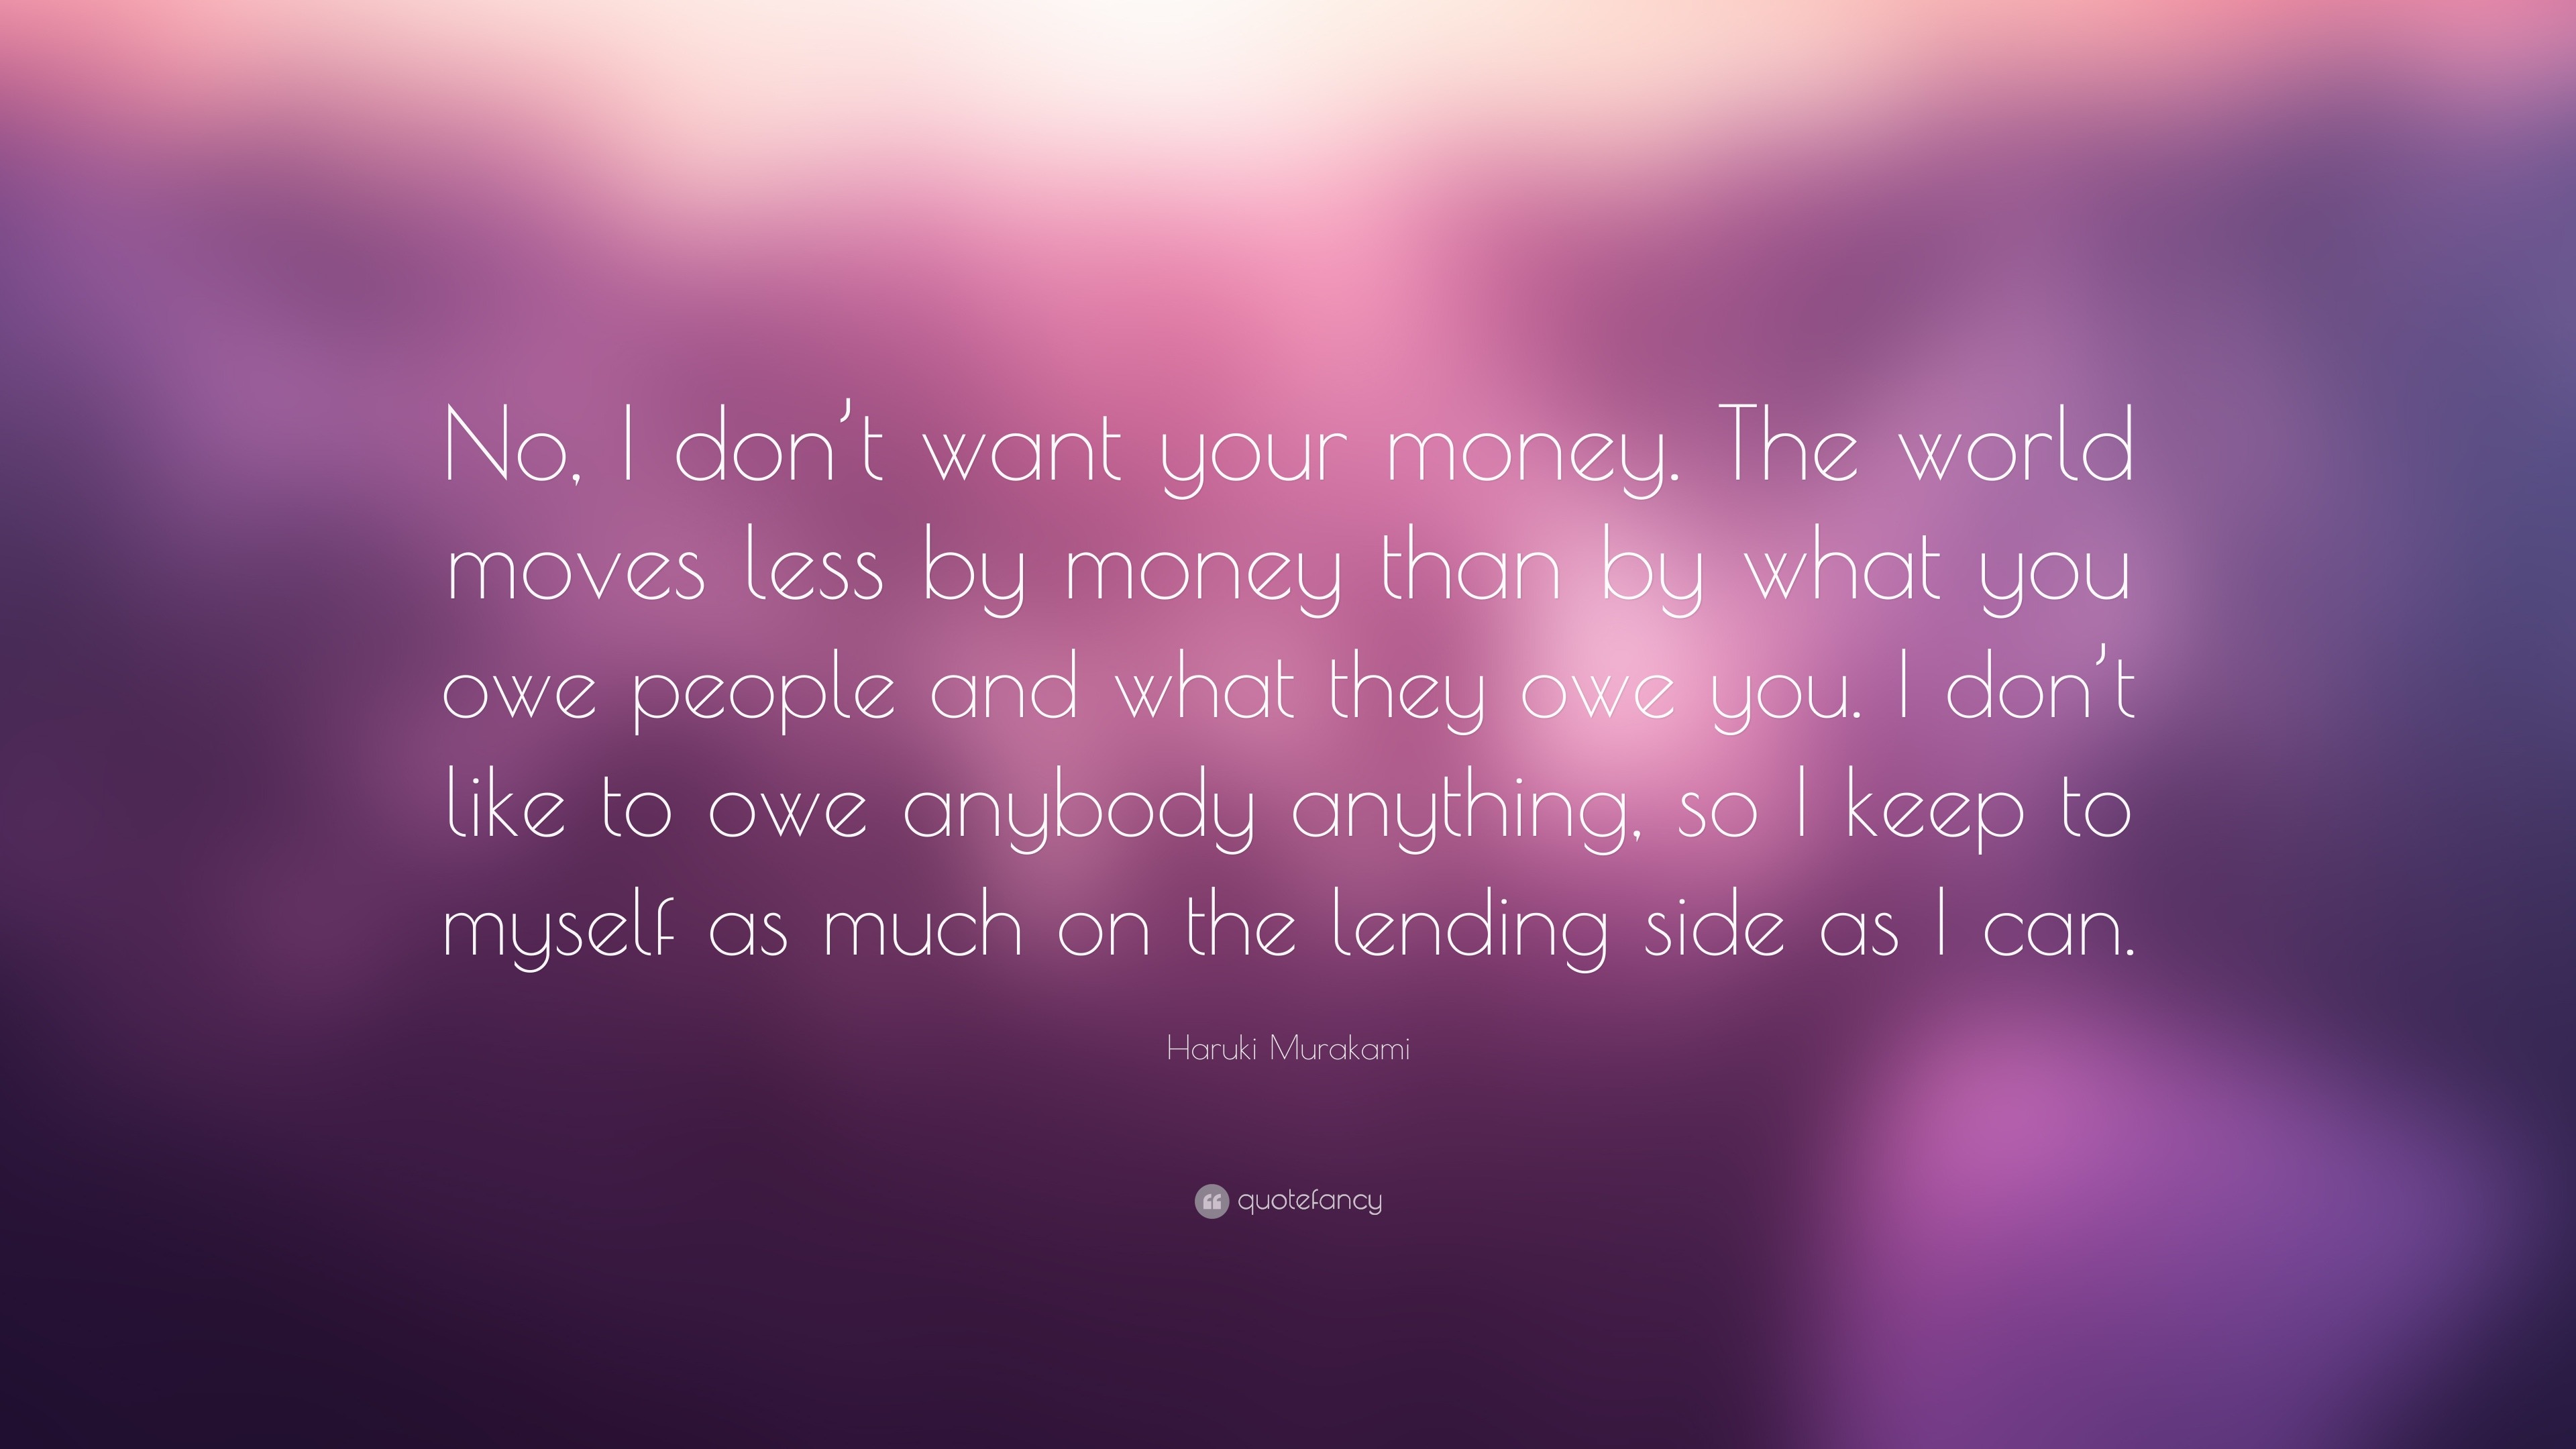 Haruki Murakami Quote No I Don T Want Your Money The World Moves Less By Money Than By What